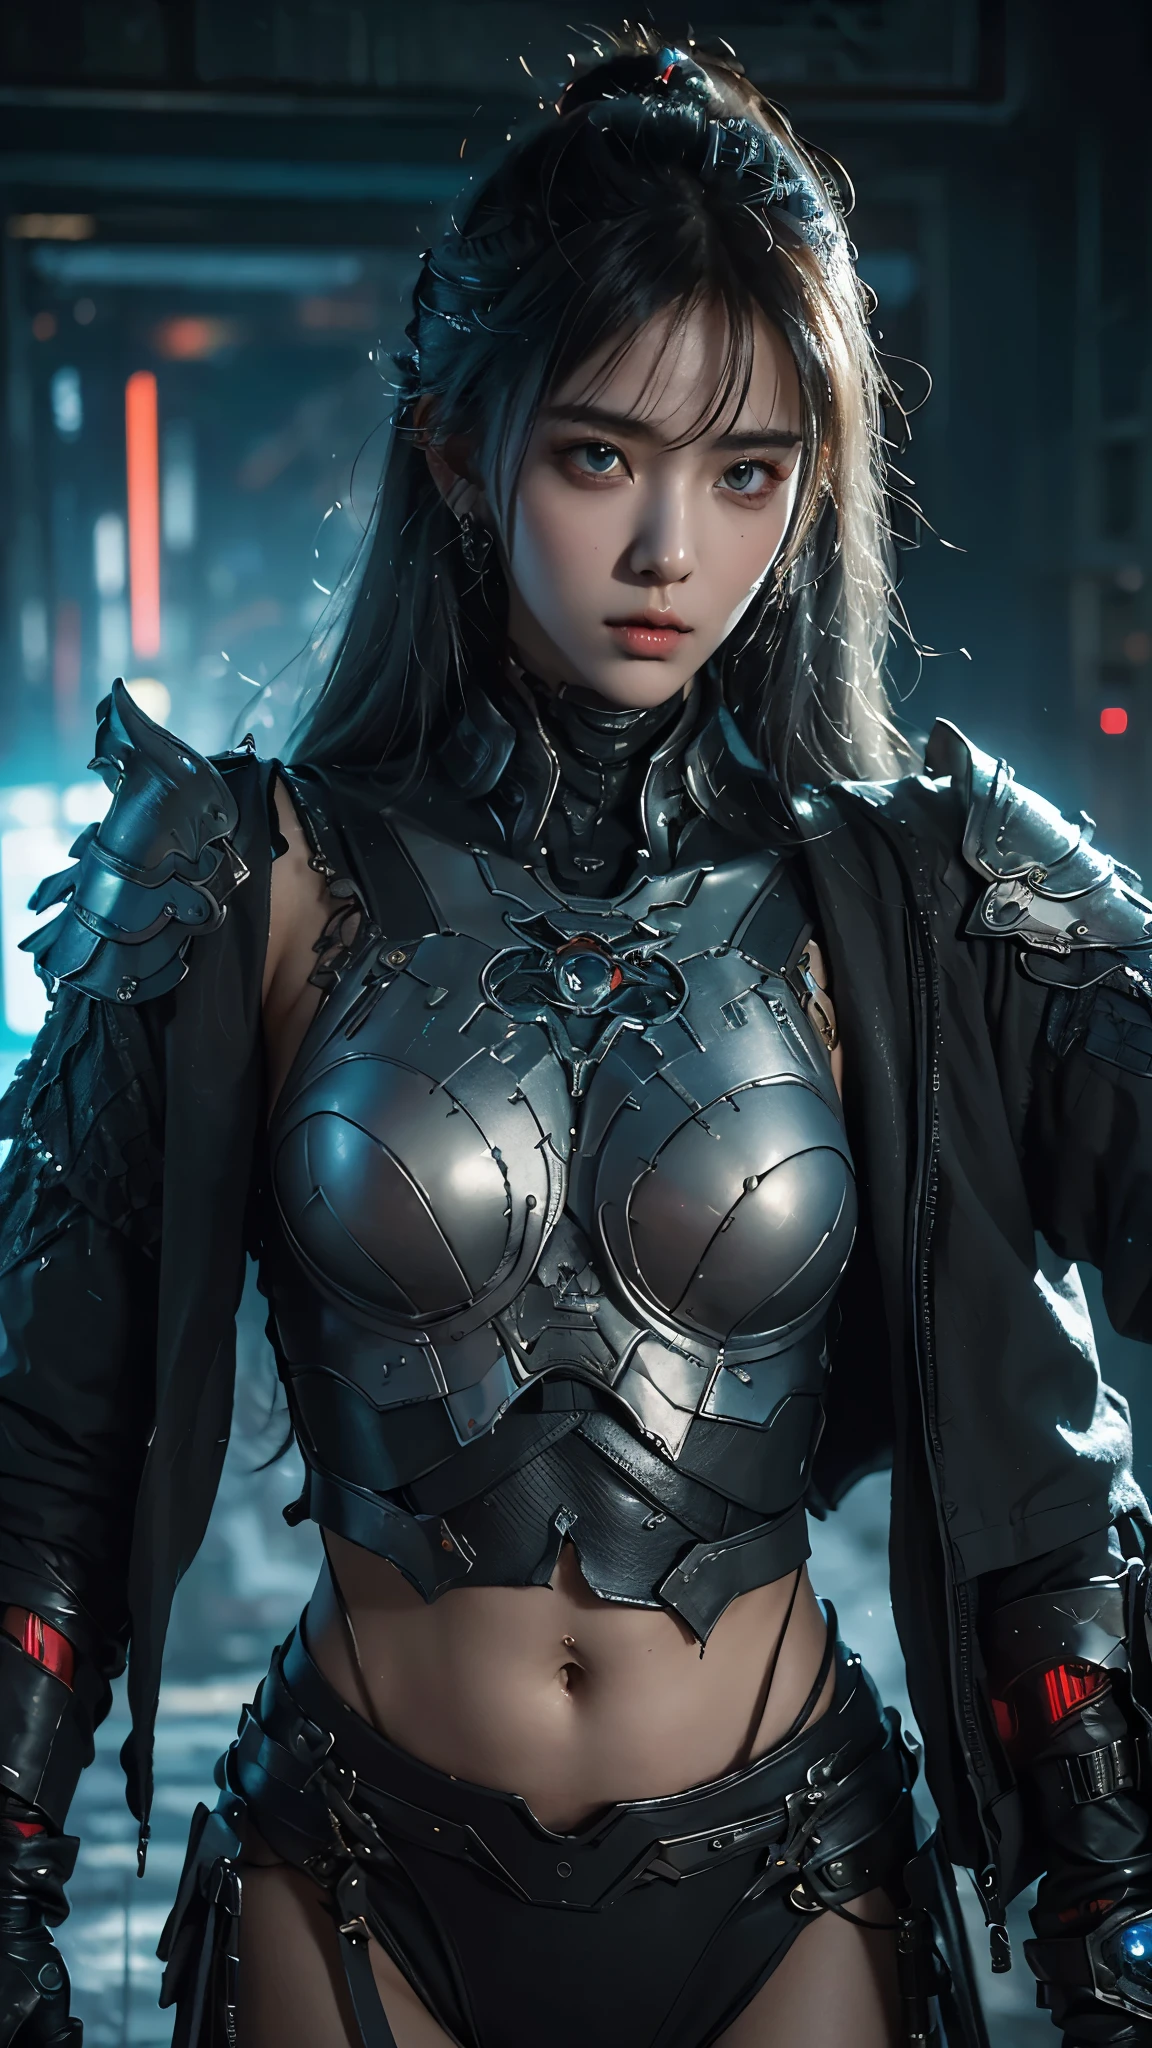 tmasterpiece,Best quality,A high resolution,8K,(Portrait photograph:1.5),(ROriginal photo),real photograph,digital photography,(Combination of cyberpunk and fantasy style),(Female soldier),20 year old girl,random hair style,By bangs,(Red eyeigchest, accessories,Keep one's mouth shut,elegant and charming,Serious and arrogant,Calm and handsome,(Cyberpunk combined with fantasy style clothing,Openwork design,joint armor,Combat uniformposing your navel,Photo pose,Realisticstyle,gray world background,oc render reflection texture